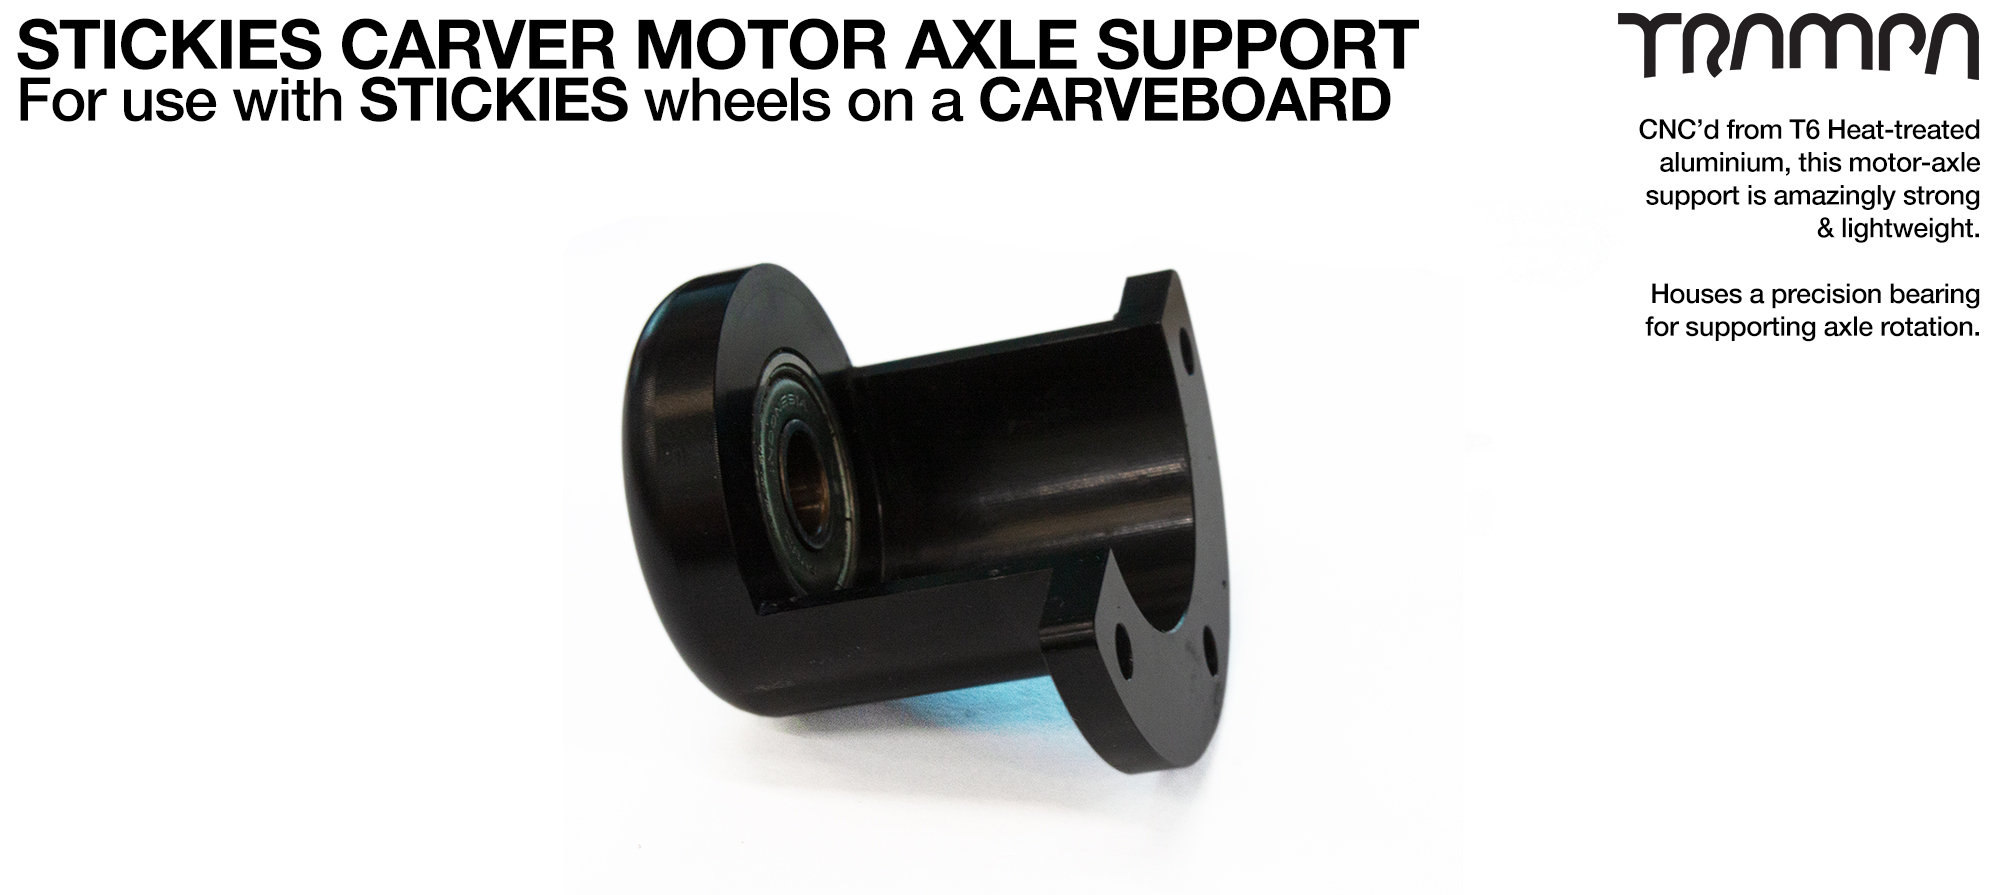 Motor Axle Support for STICKIES & GUMMIES Wheels